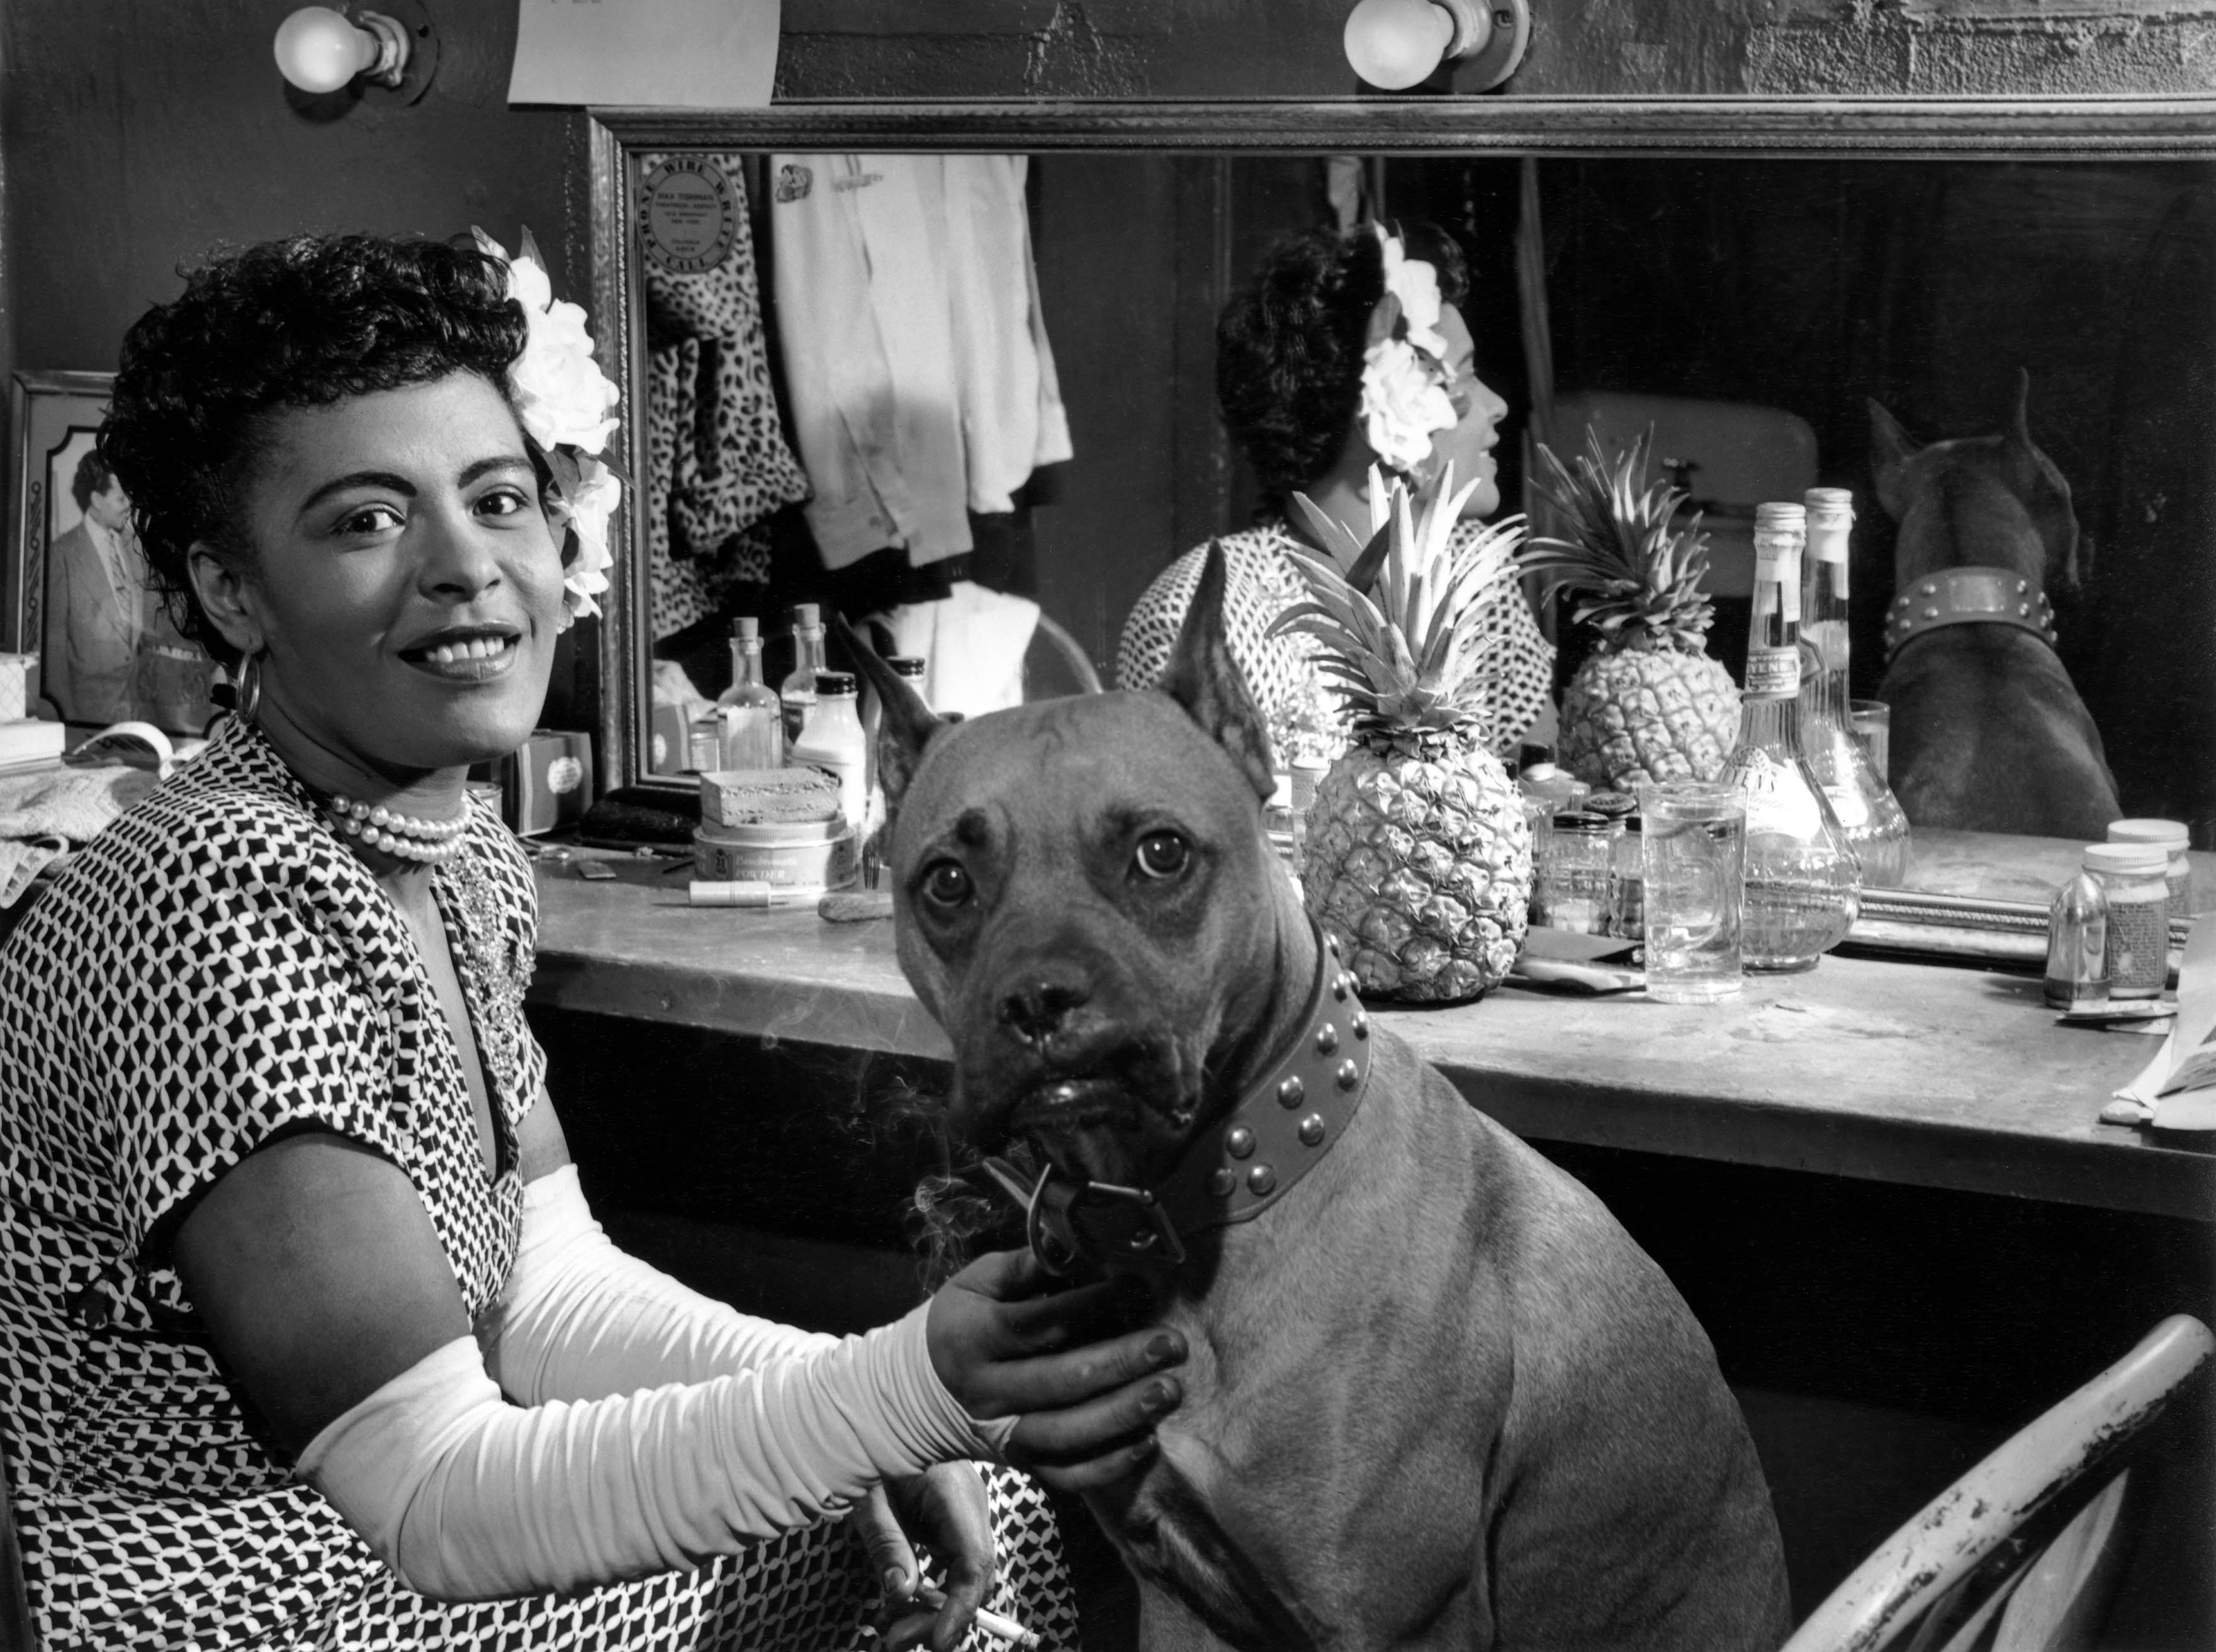 A black and white photo of Billie Holiday smiling backstage with her dog.